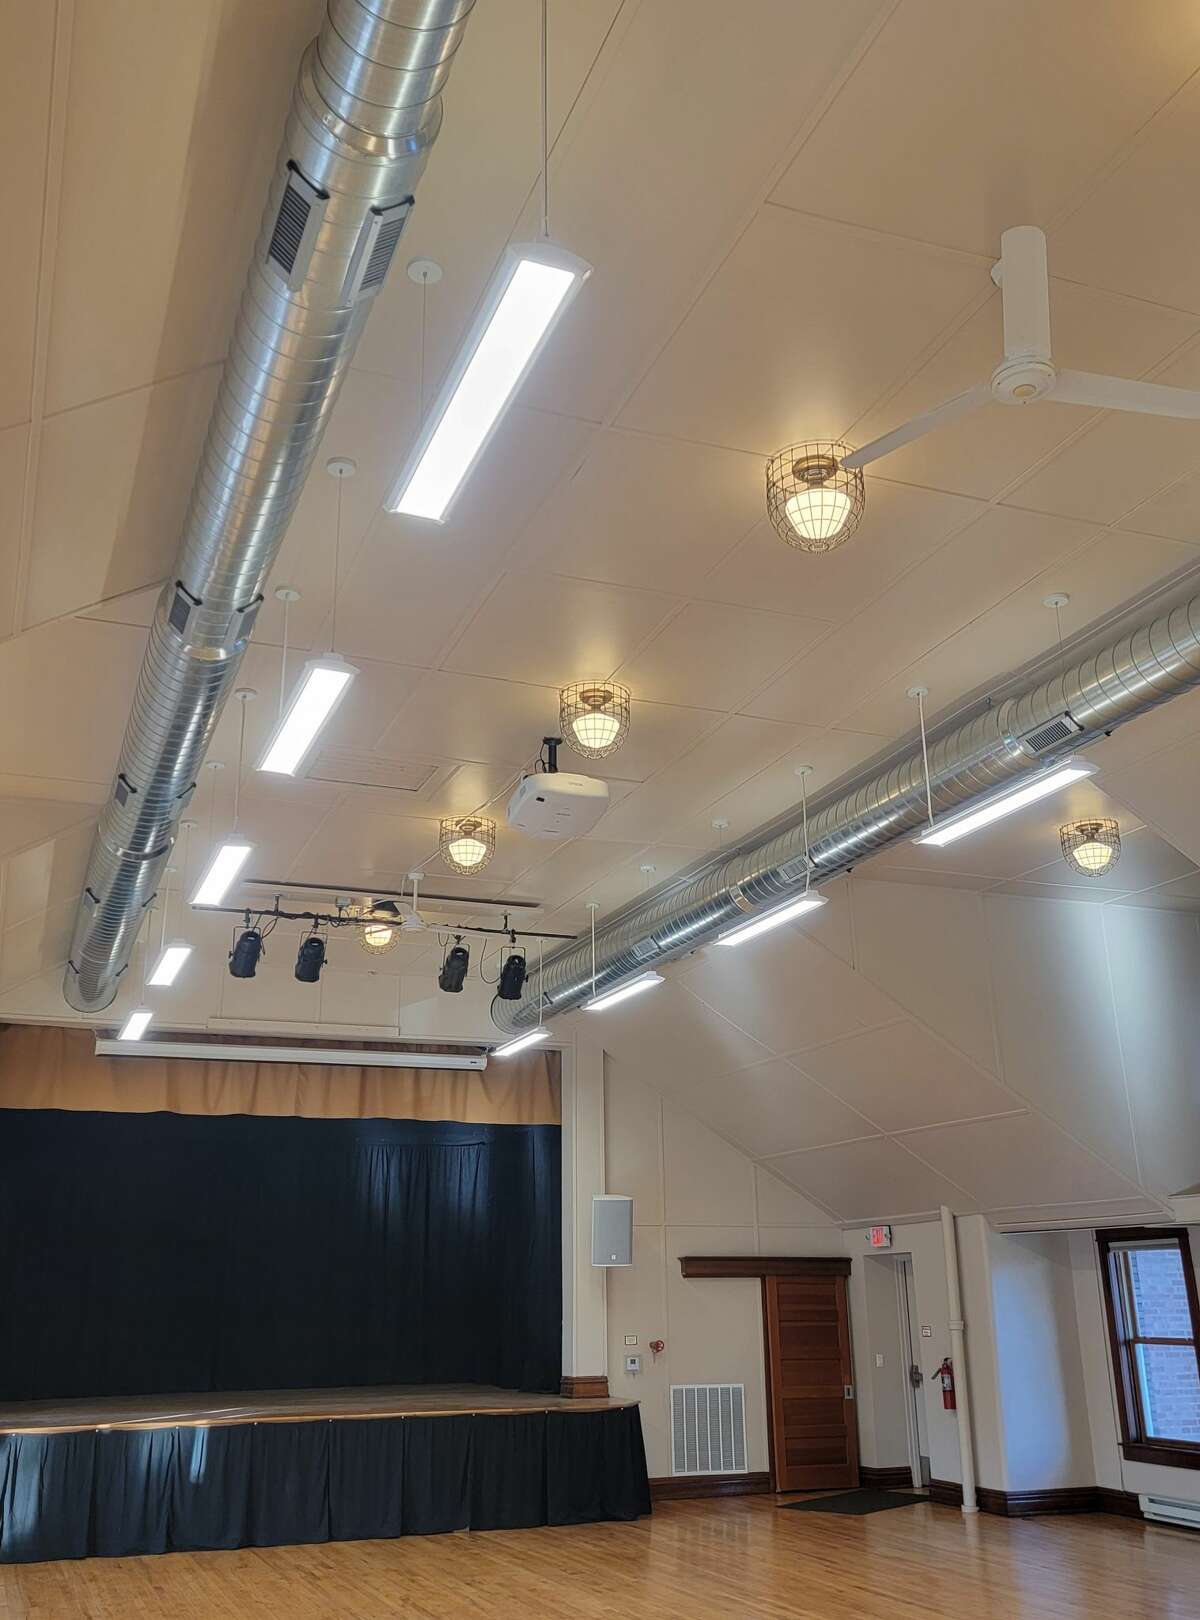 Mills Hall was updated with new paint, lights and heating and cooling system in 2019. 